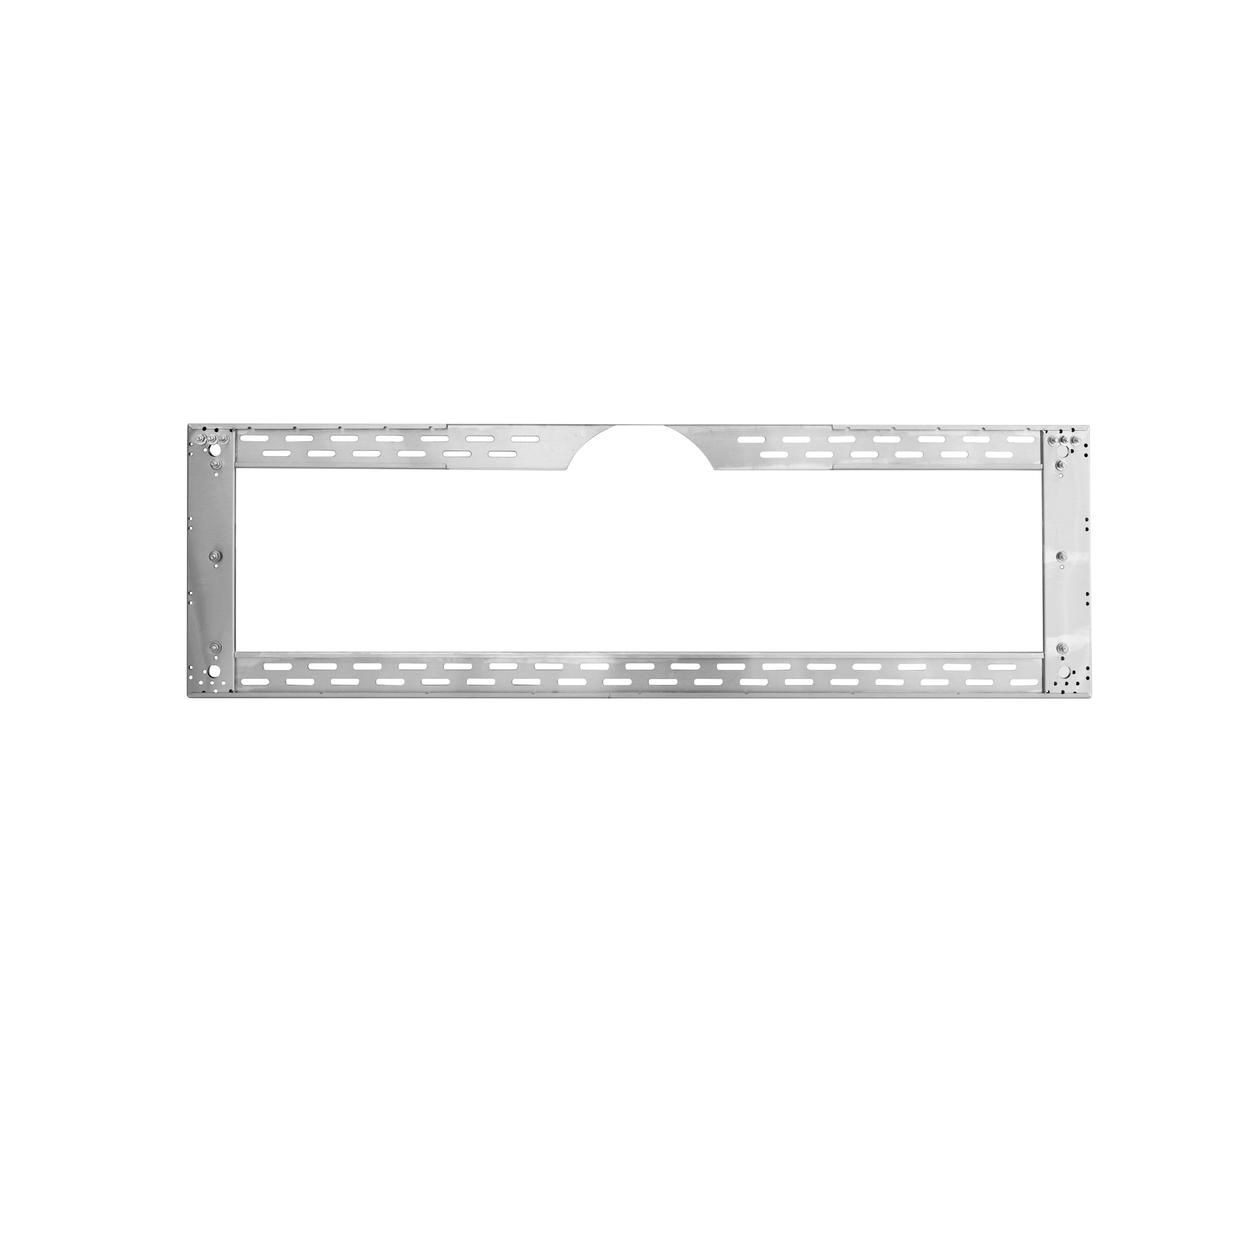 36" Vent Hood Spacer Template